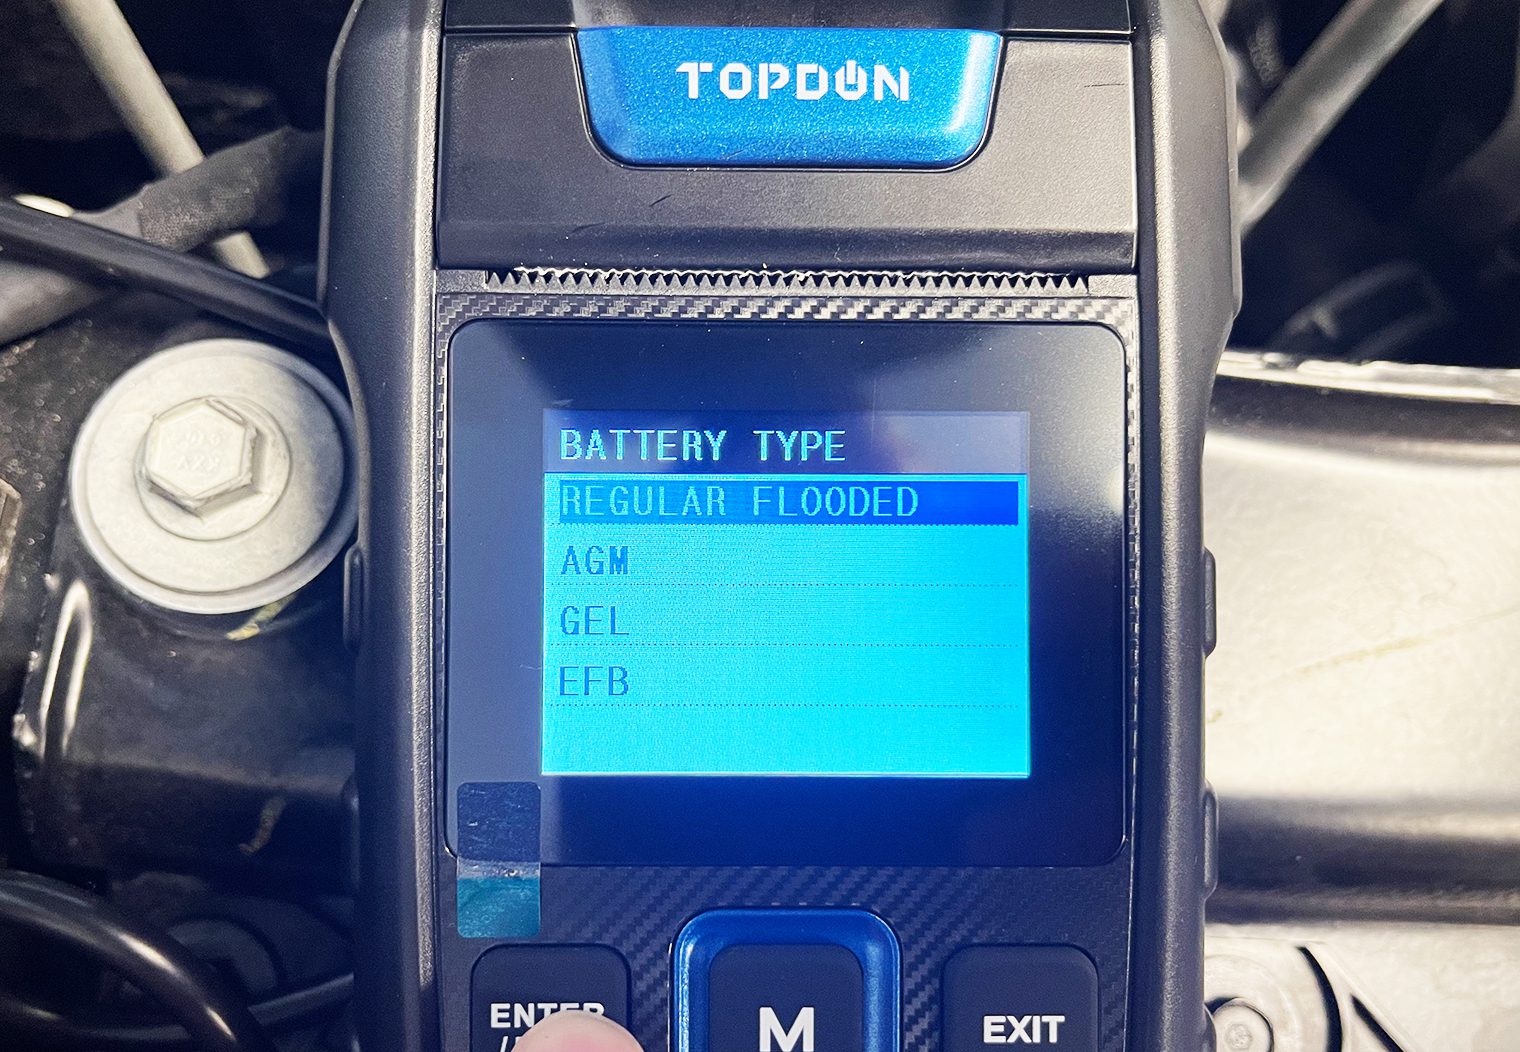 TOPDON BT300P select battery type